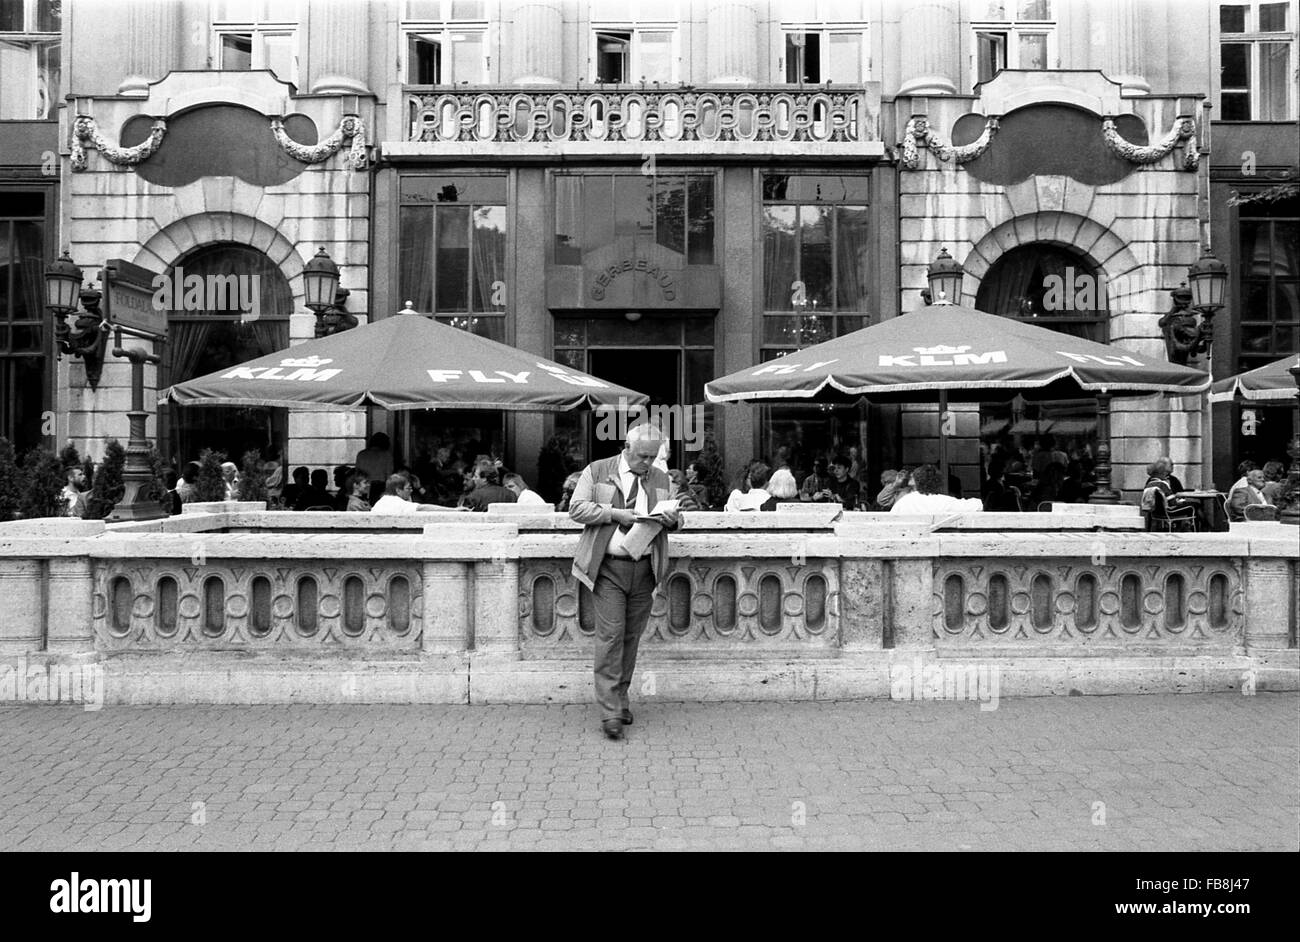 Glance on Bupapest at the time of the Nineties. -  1990  -  Hungary / Budapest  -  Glance on Bupapest at the time of the Nineties. -  Daily-life scene. A man is reading a book at the entrance of the "Foldalatti" subway station; meanwhile some tourists and Hungarians are sitting oustide of a big restaurant of the Hosok Tere square (Heroes' Square)   -  Philippe Gras / Le Pictorium Stock Photo